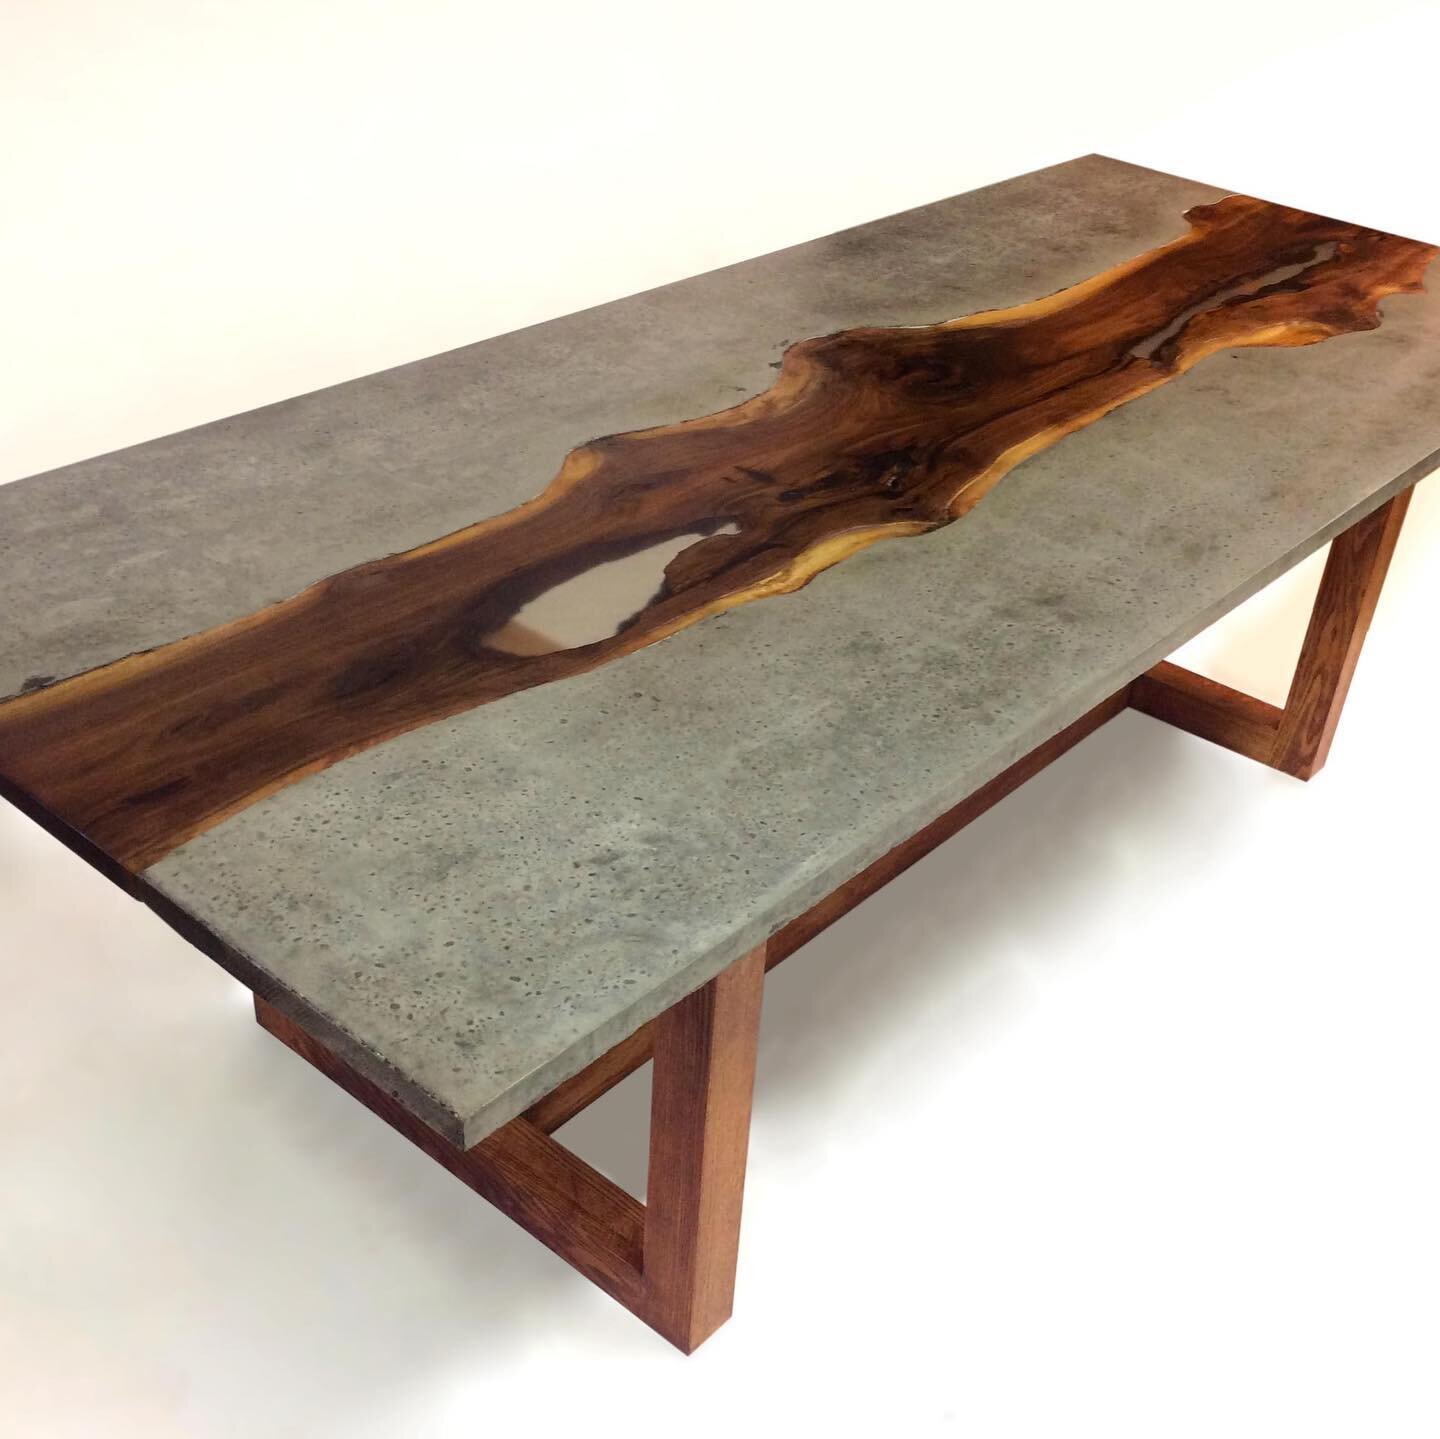 Custom concrete and live edge wood dining tables available for order! #furnituredesign #table #diningroom #diningtable #design #interiordesign #custom #customfurniture #furniture #woodwork #woodworker #artist #artistsoninstagram #luxury #luxurylifest